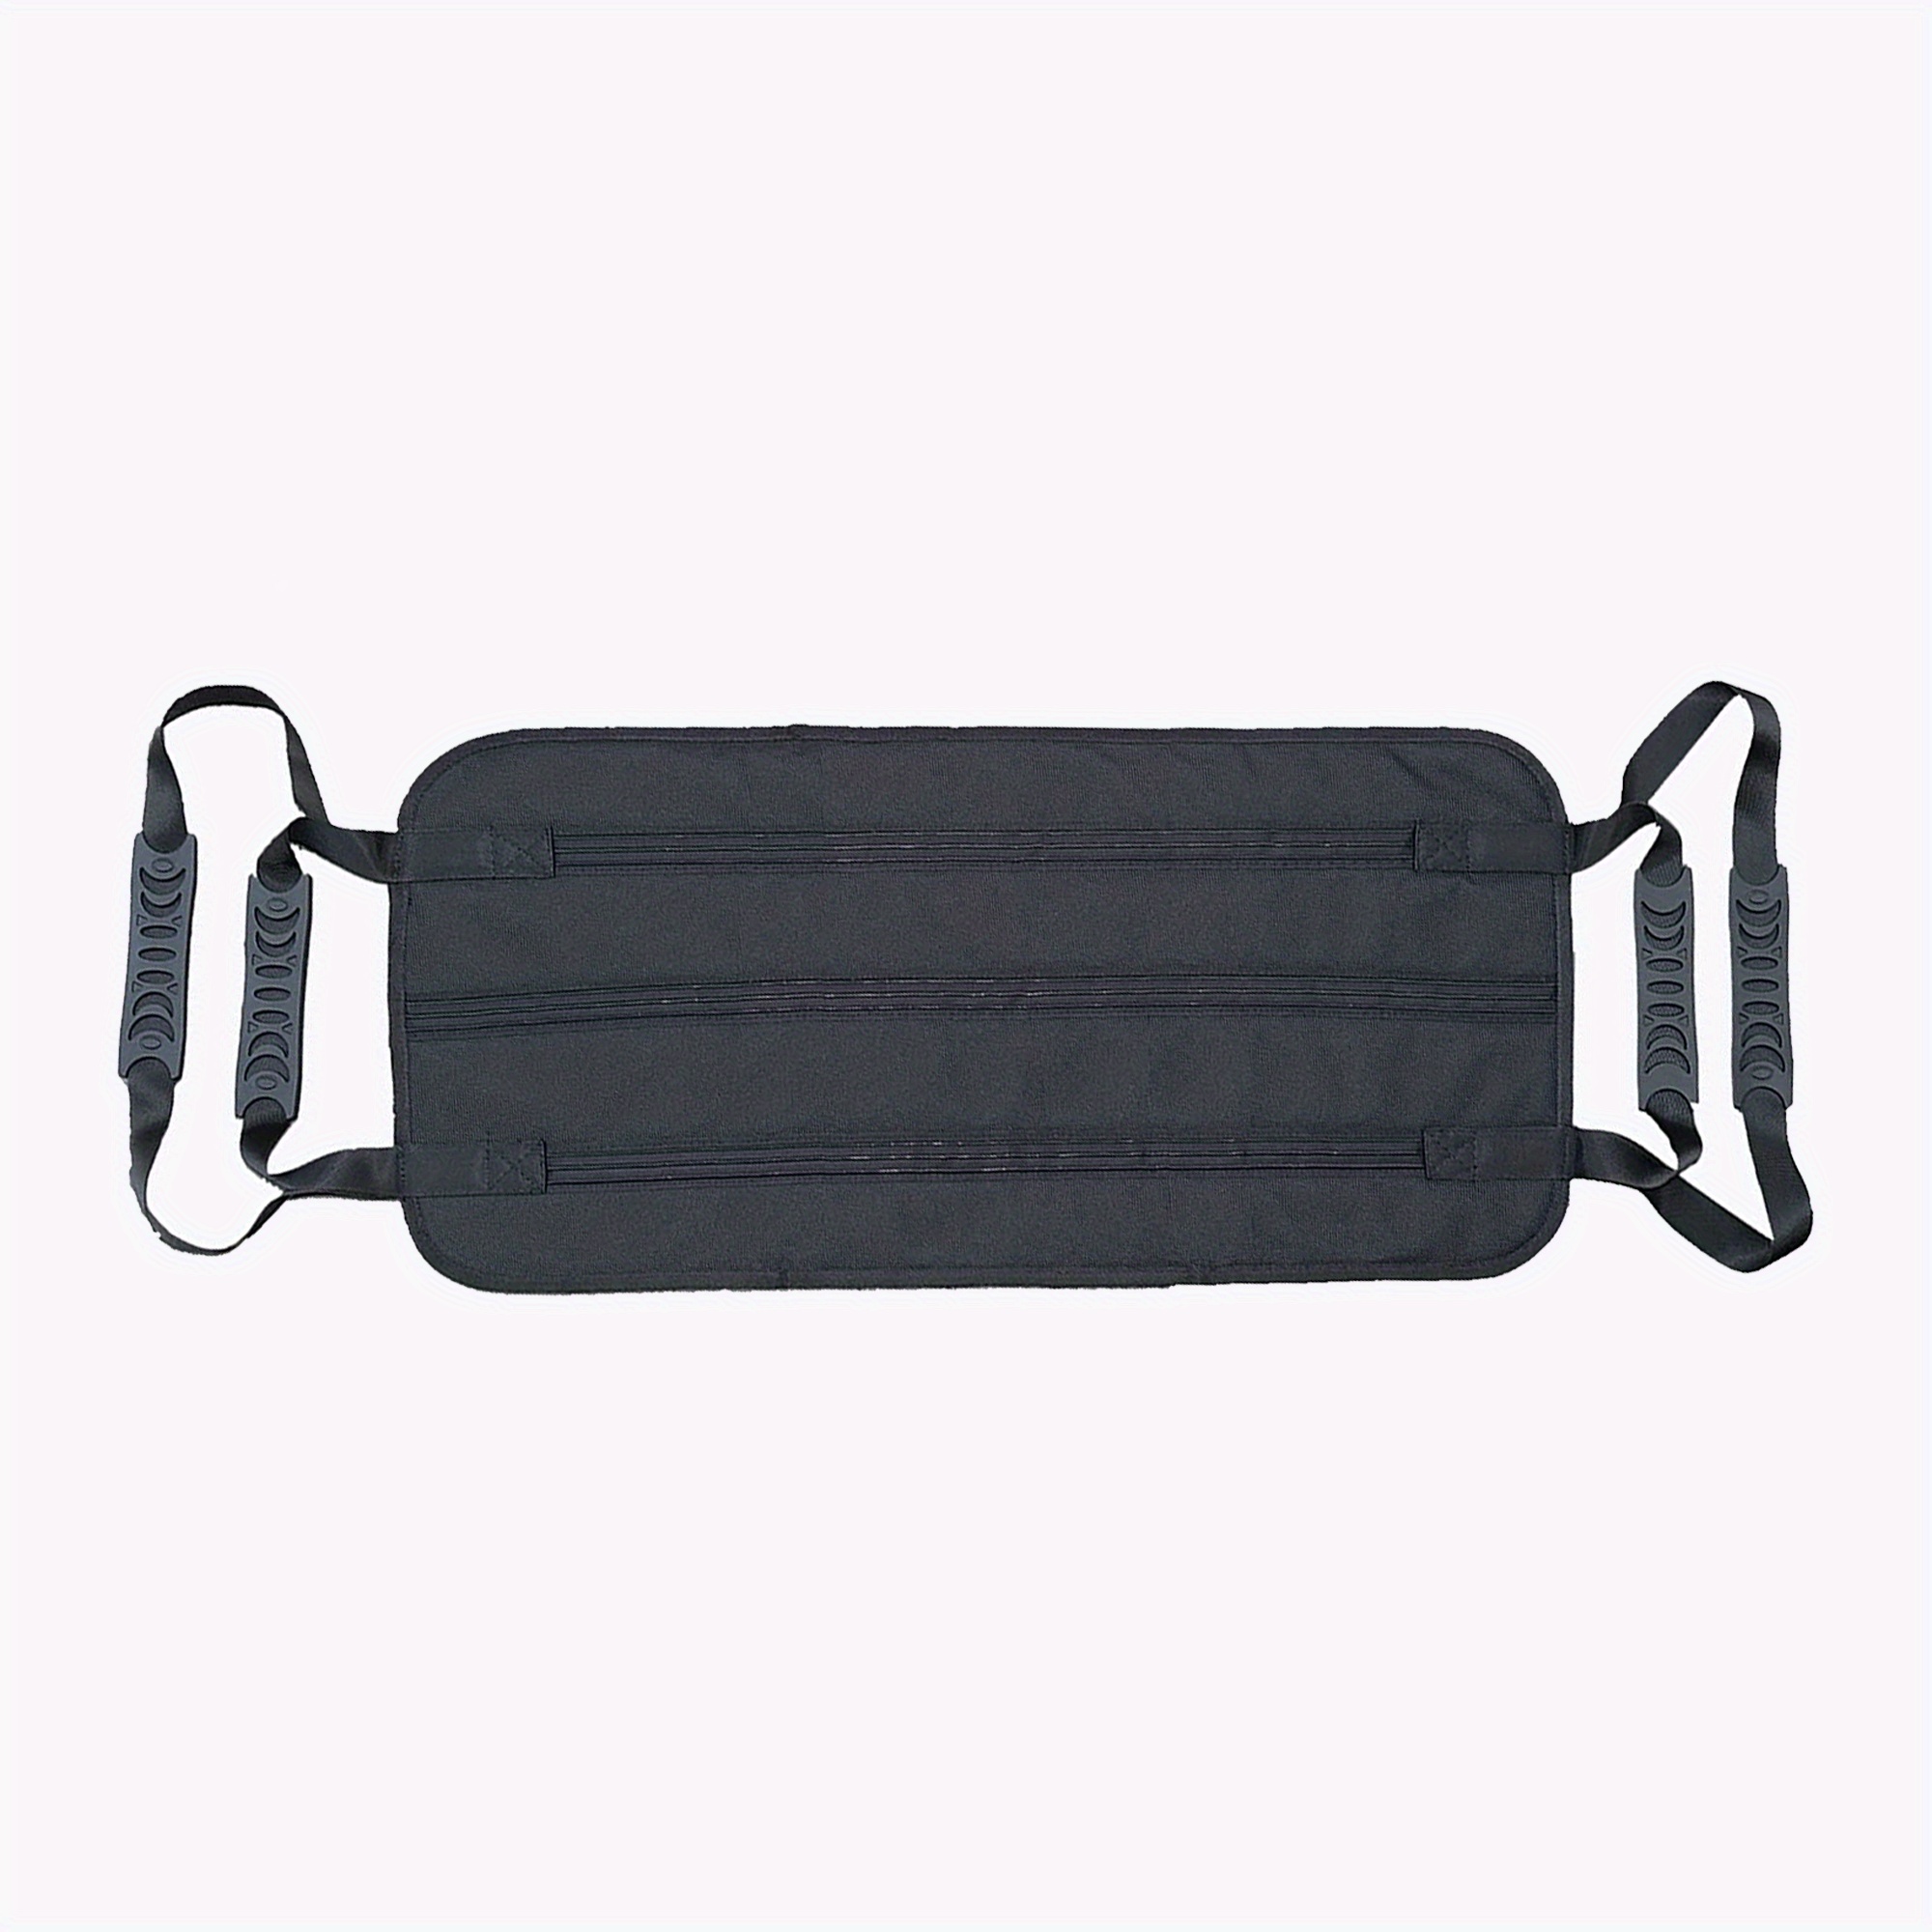 Dioche Padded Bed Transfer Nursing Sling for Patient, Elderly Safety  Lifting Aids Home Bed Assist Handle Back Lift Mobility Belt for Patient